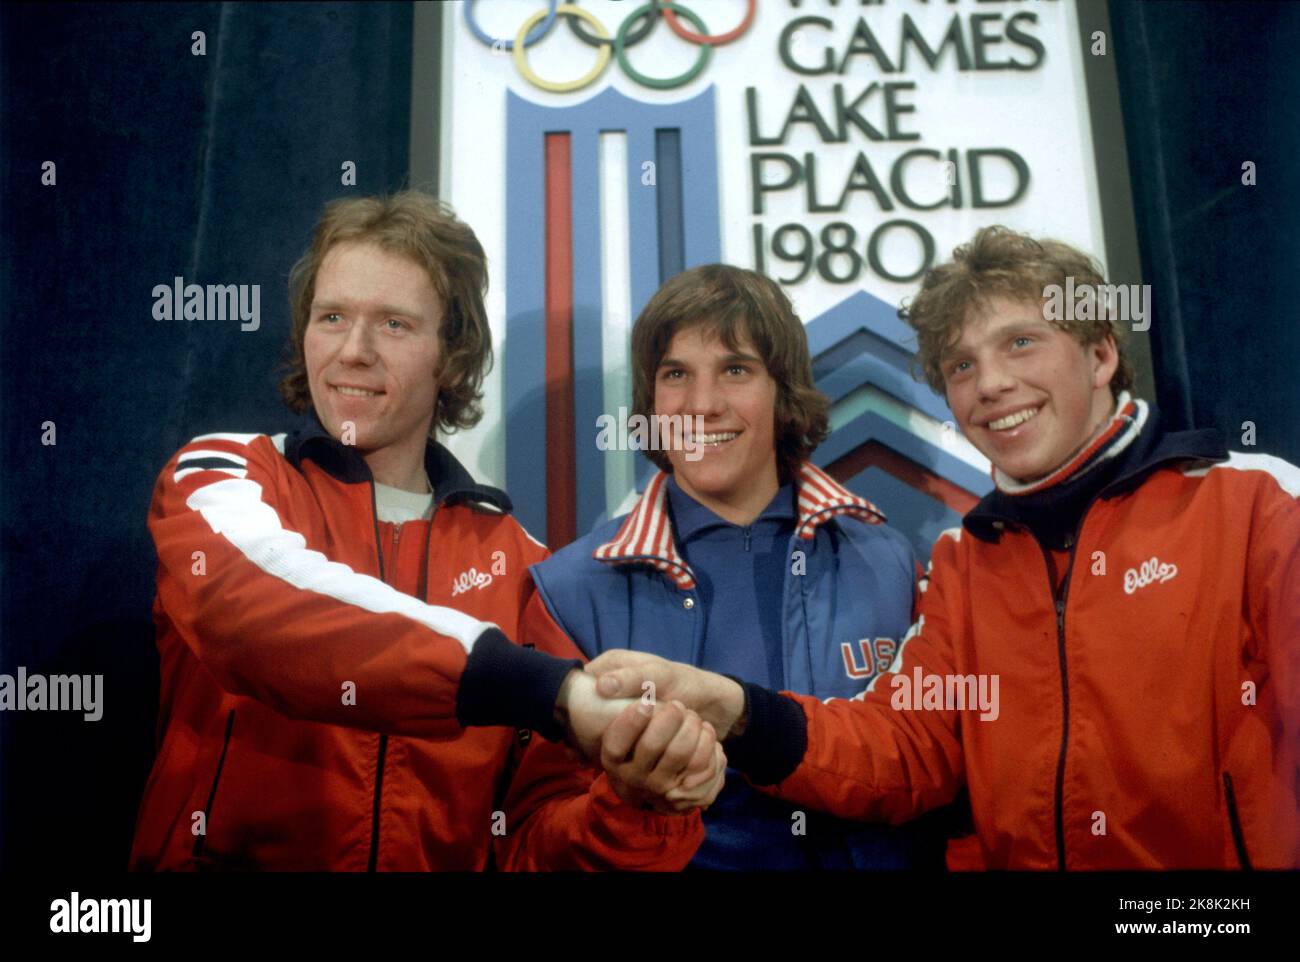 Lake Placid, N.Y., USA, 198002: Olympic Lake Placid 1980. 5000m skates, men. The picture: The top three photographed in connection with the victory ceremony after 5000m, February 16, 1980. From: Kay Arne Stenshjemmet (Nor, Silver), Eric Heiden (USA, gold), Tom Erik Oxholm (Nor, Bronze). Photo: NTB / EPU / NTB Stock Photo